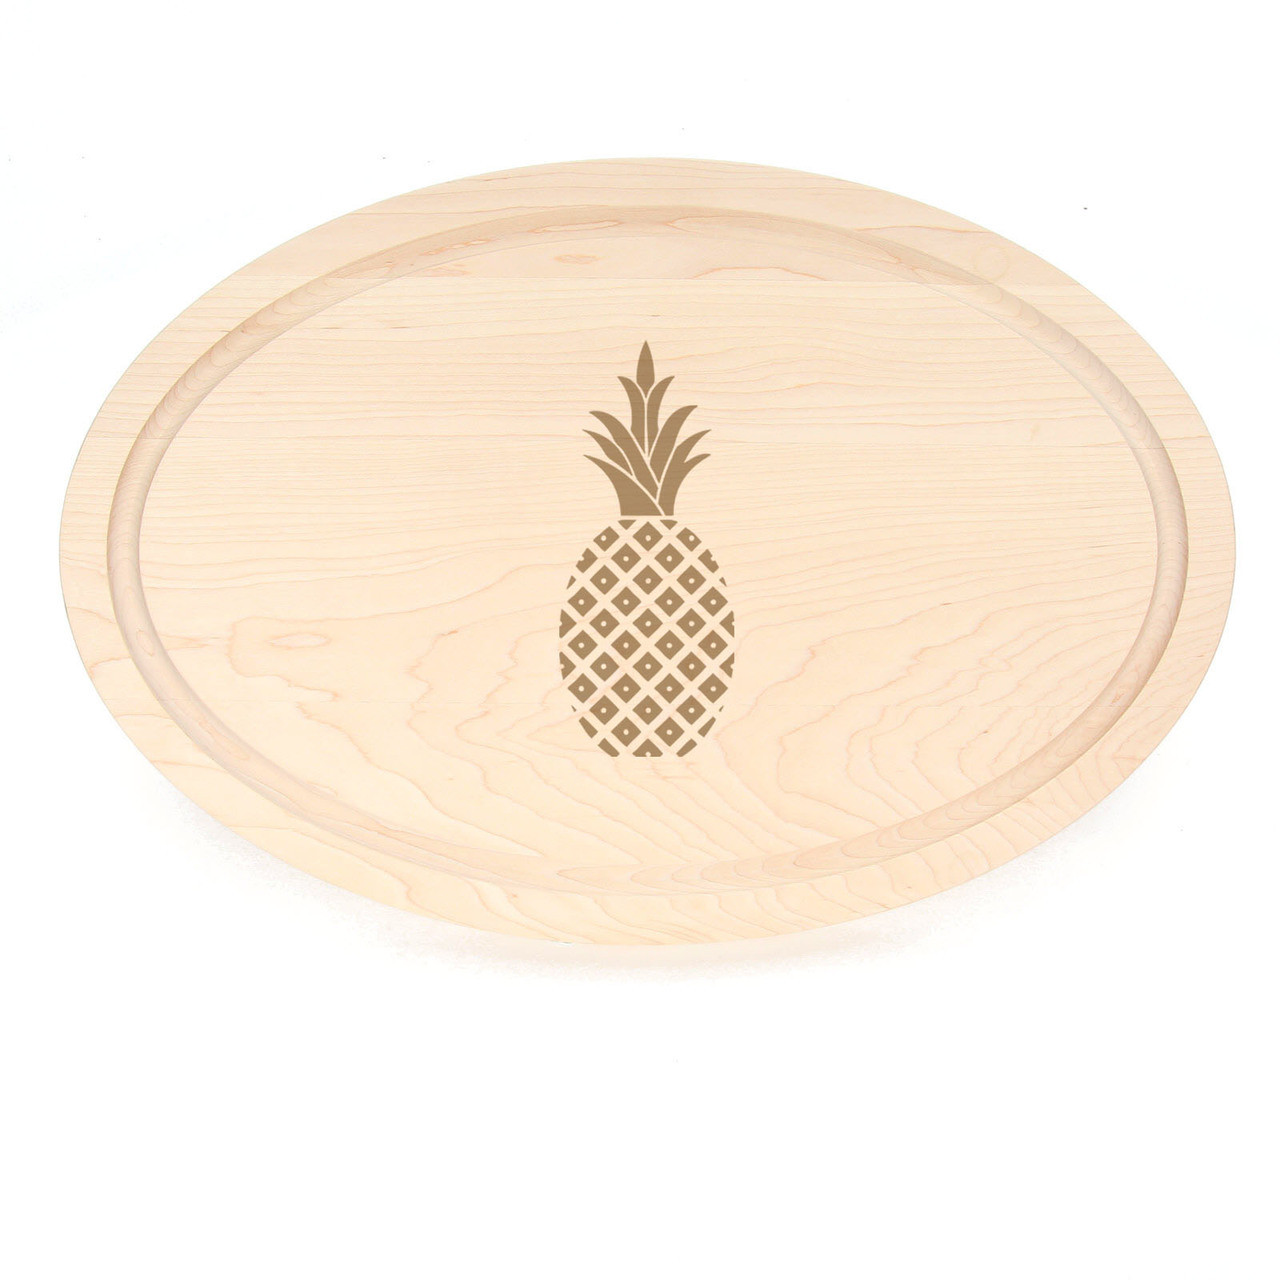 Laser Engraved Pineapple 12 x 18 Oval Maple Cutting Board